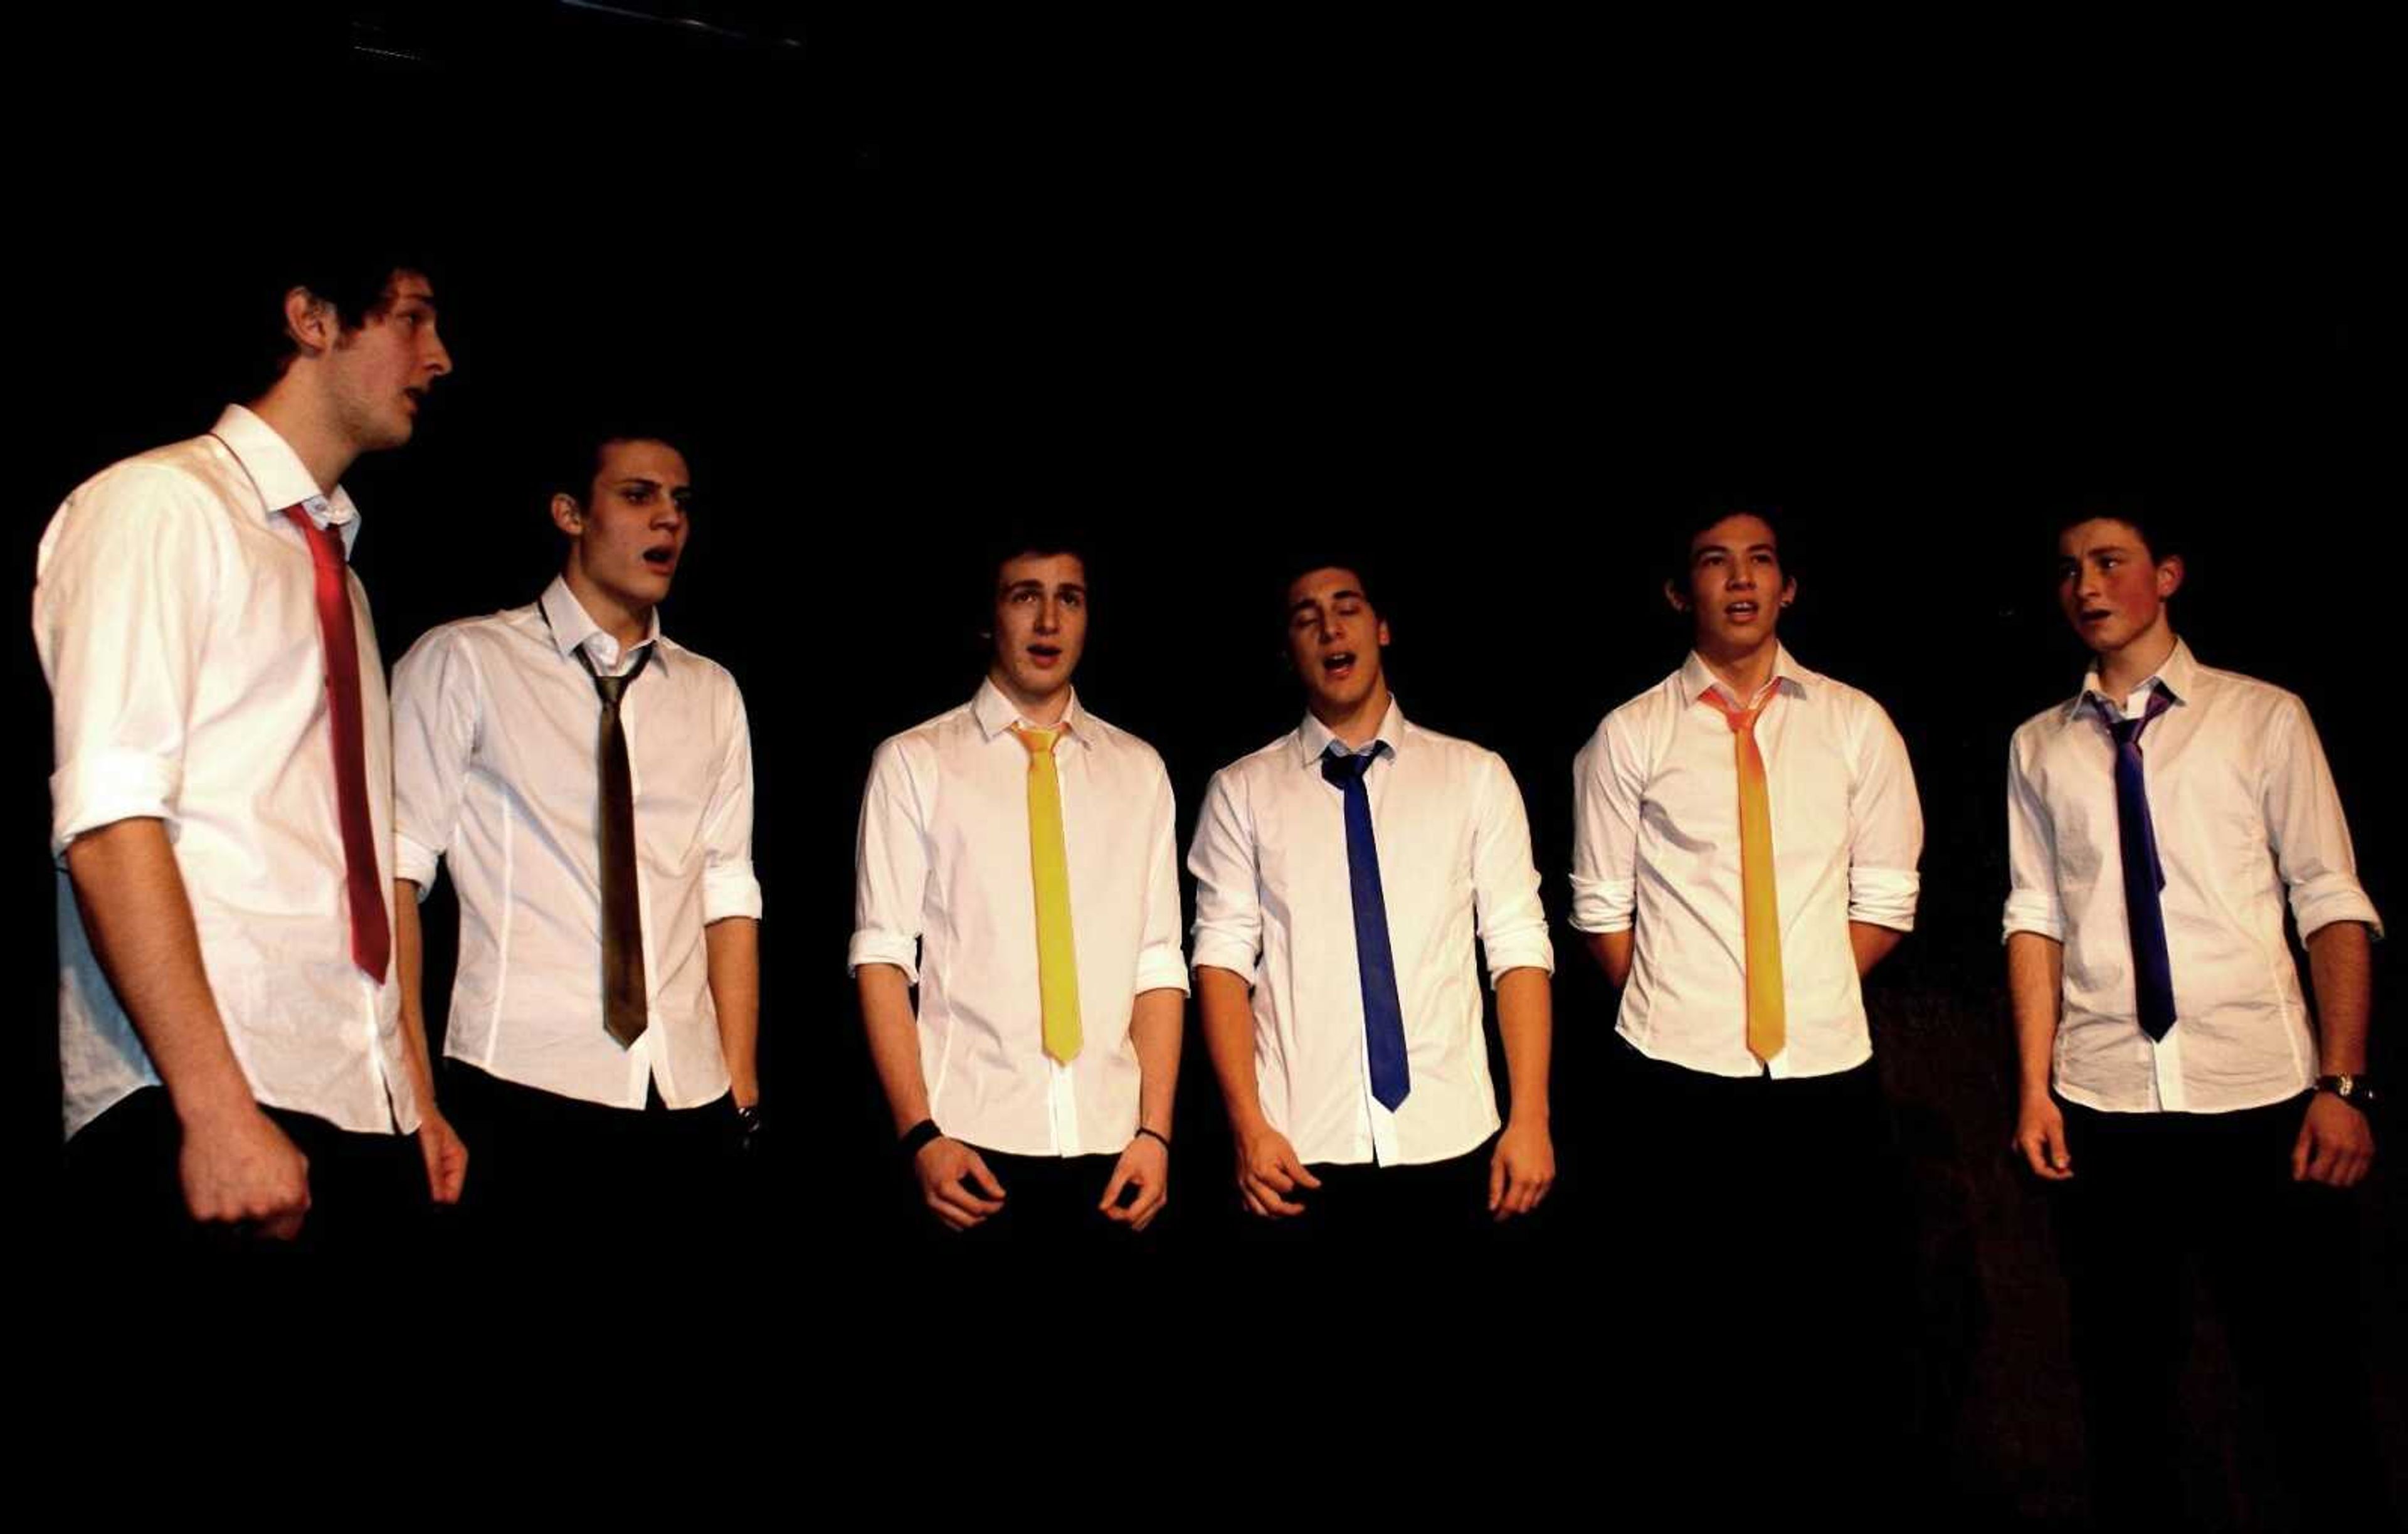  Mirco Tscharner (fourth from left) with his six-man a cappella group, Invivas, in Switzerland. Submitted photo